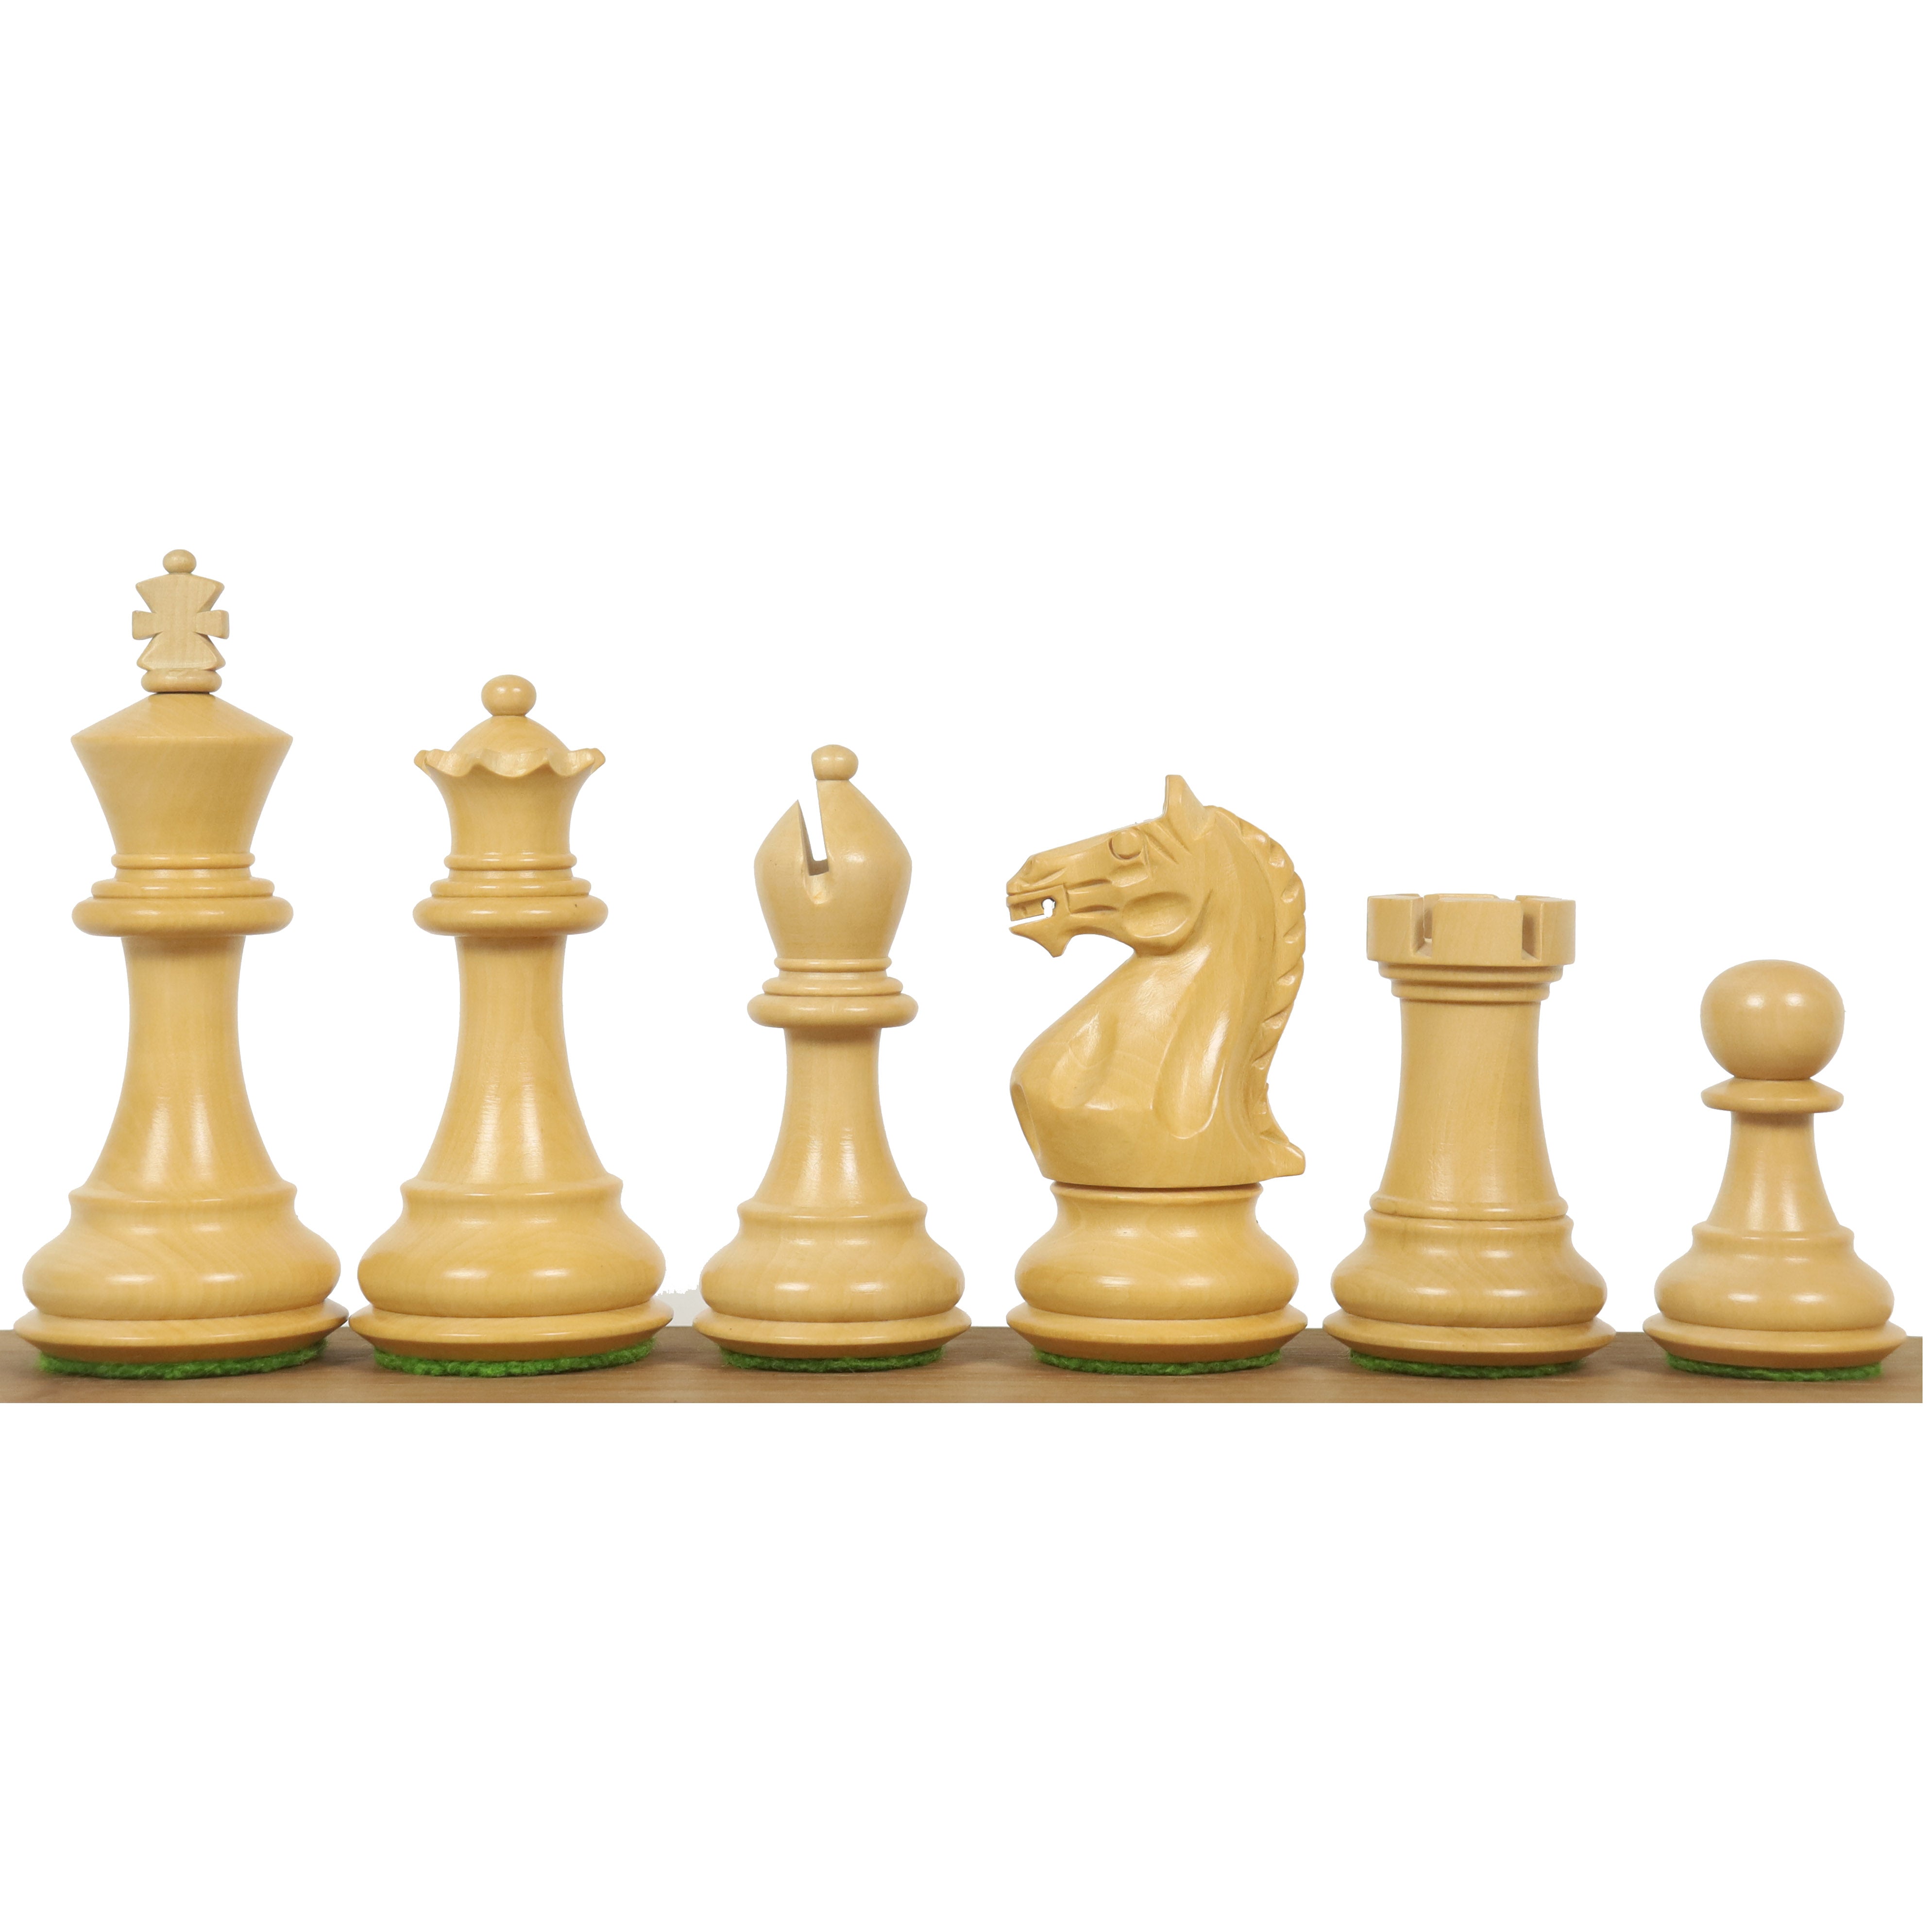 The Queen's Gambit Chess is a rewarding board game that also